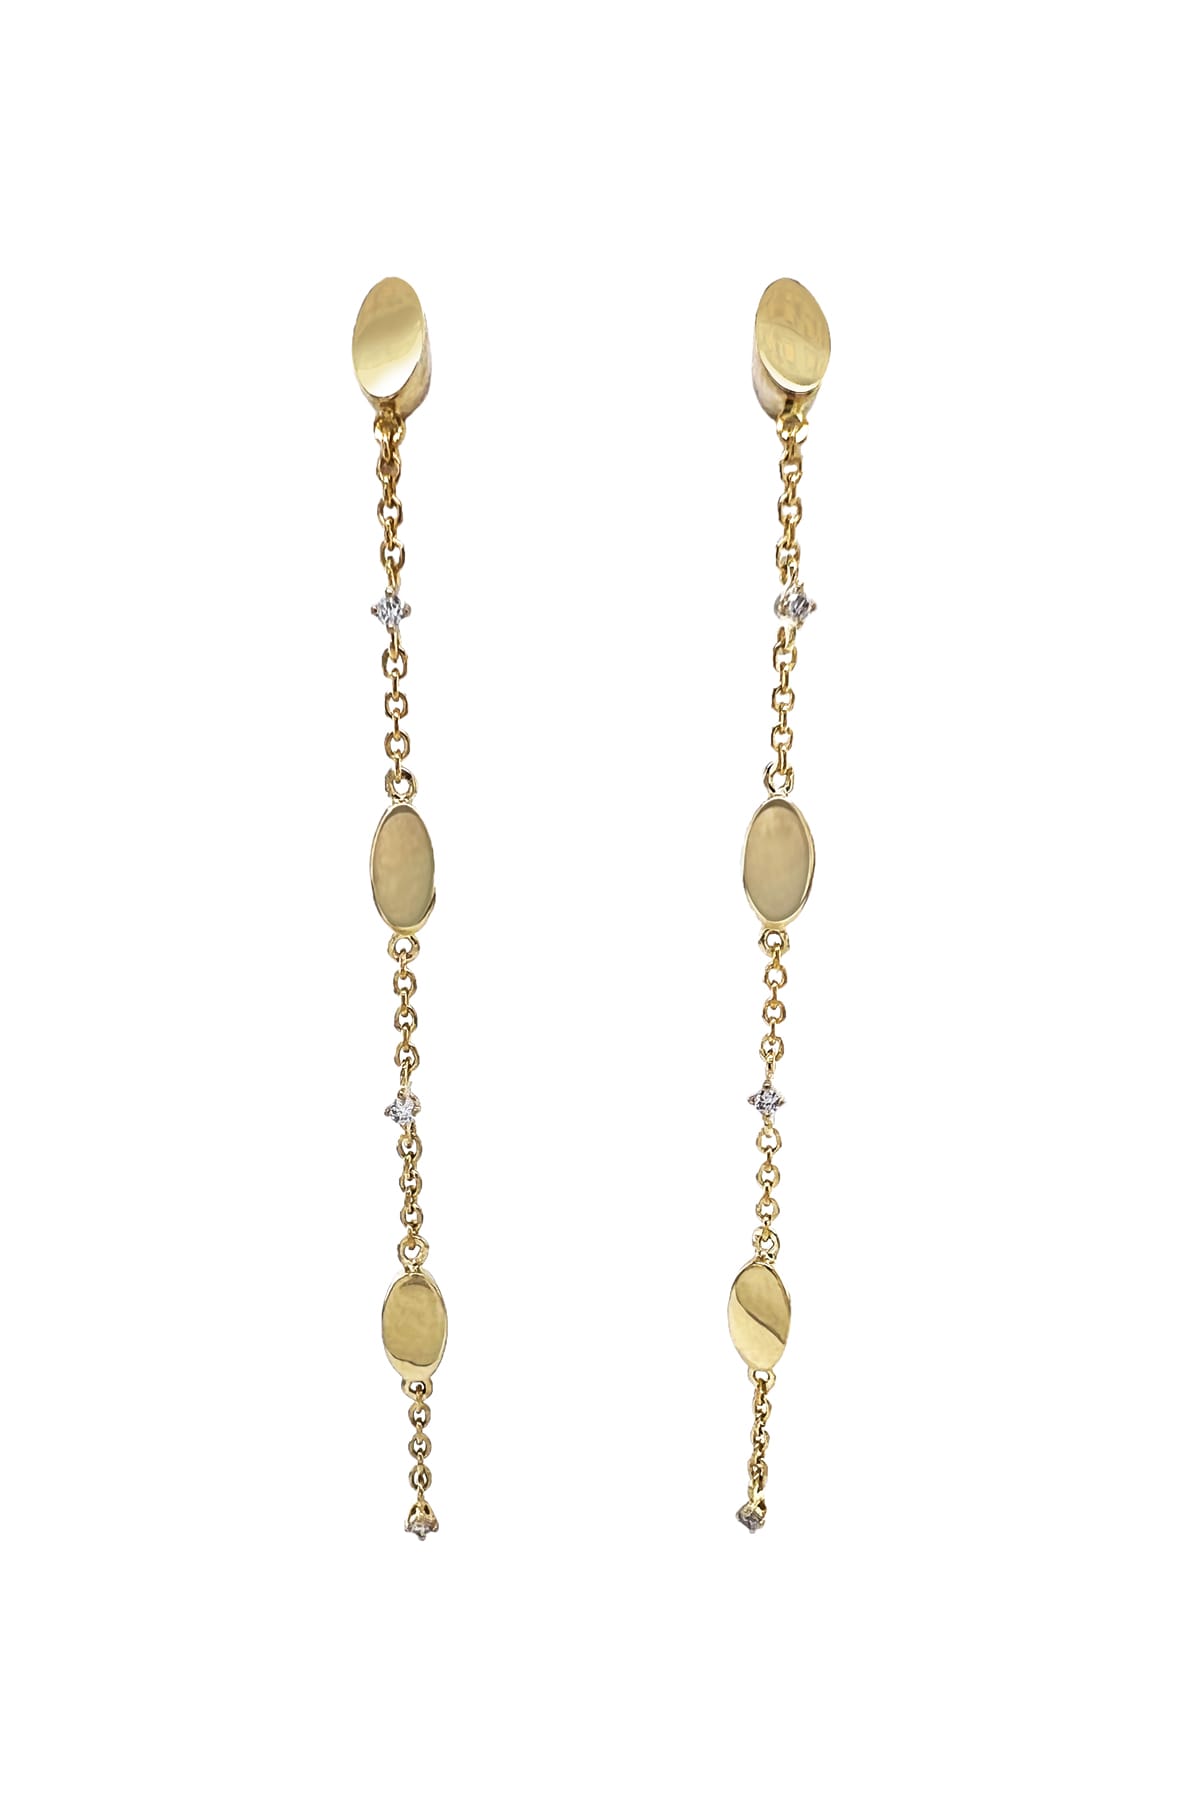 9 Carat Yellow Gold Chain Style Drop Stud Earrings available at LeGassick Diamonds and Jewellery Gold Coast, Australia.